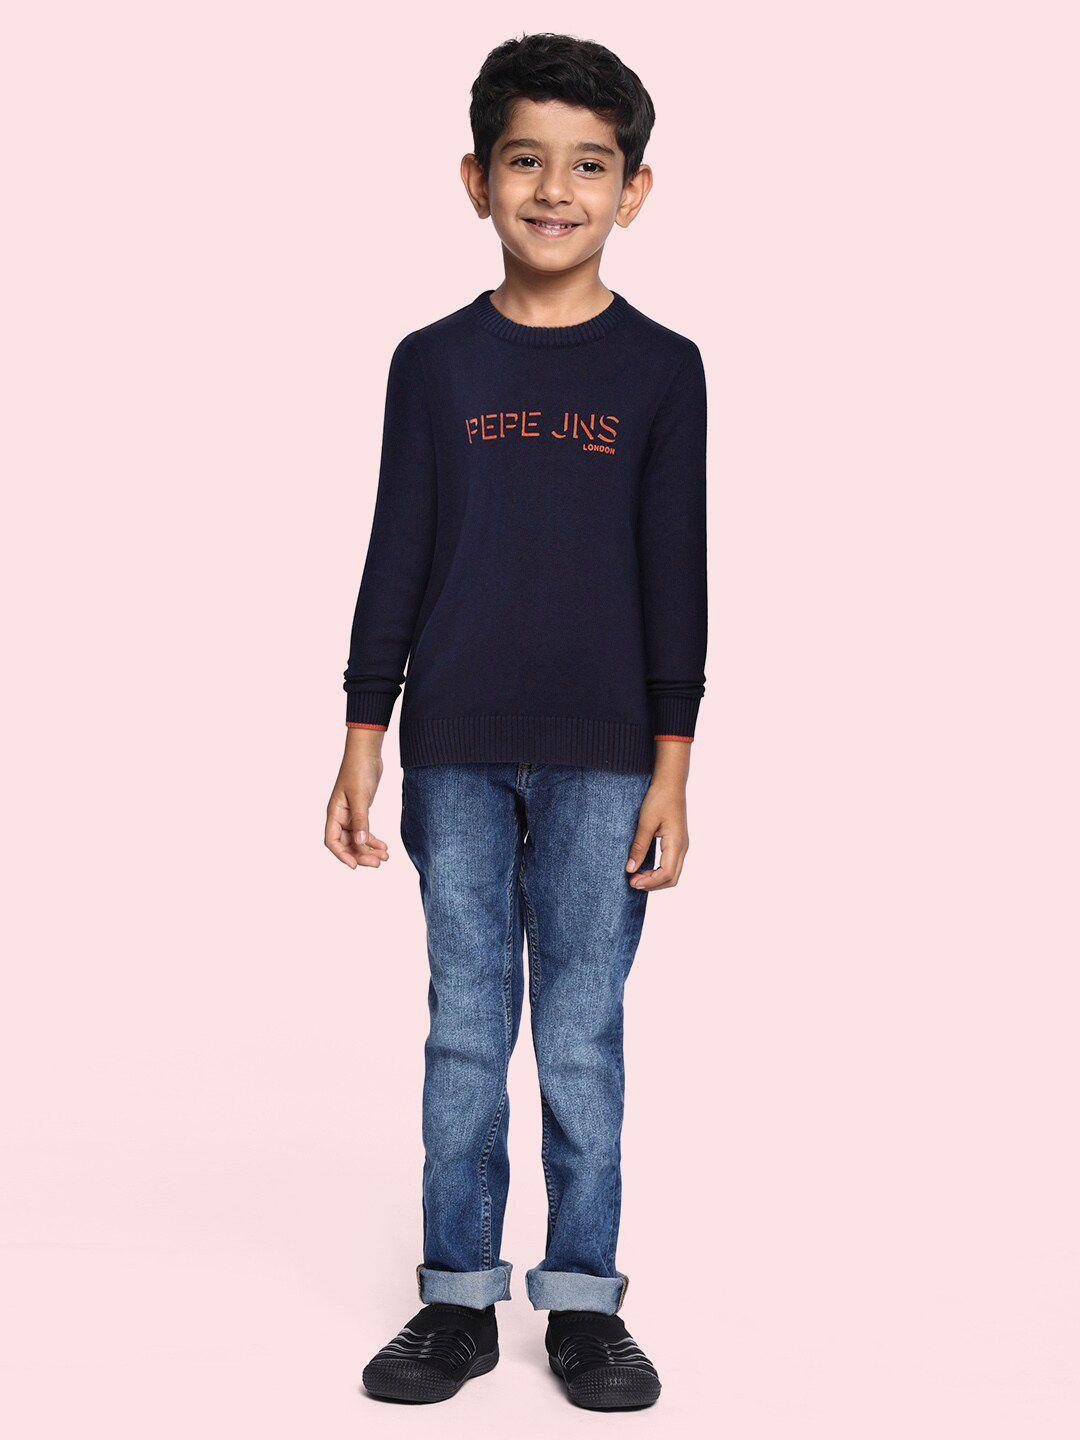 pepe-jeans-boys-navy-blue-typography-printed-cotton-regular-pullover-with-applique-detail